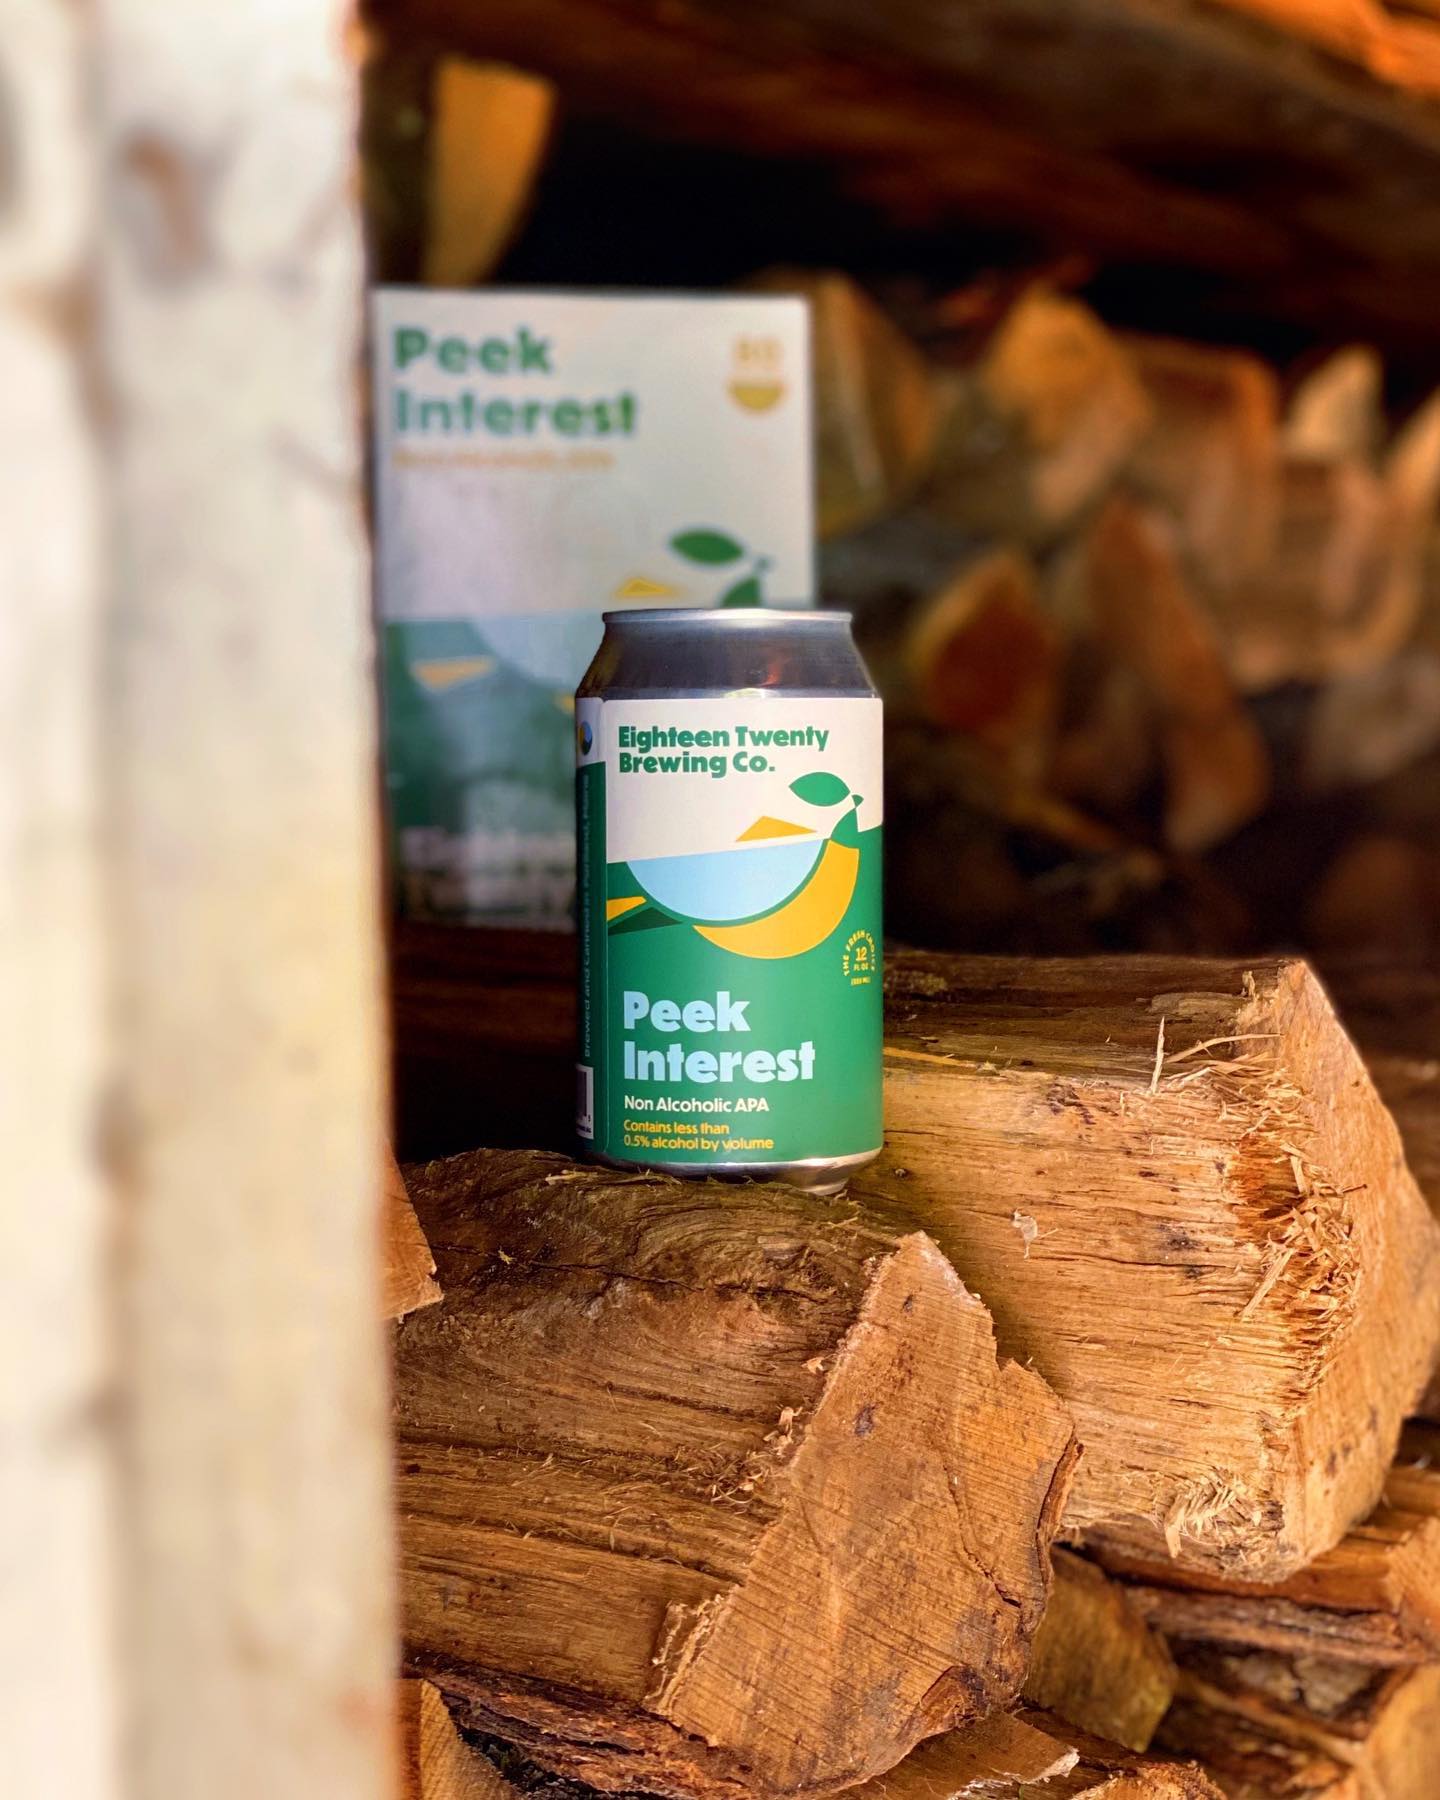 Cold can of Peek Interest sitting atop firewood